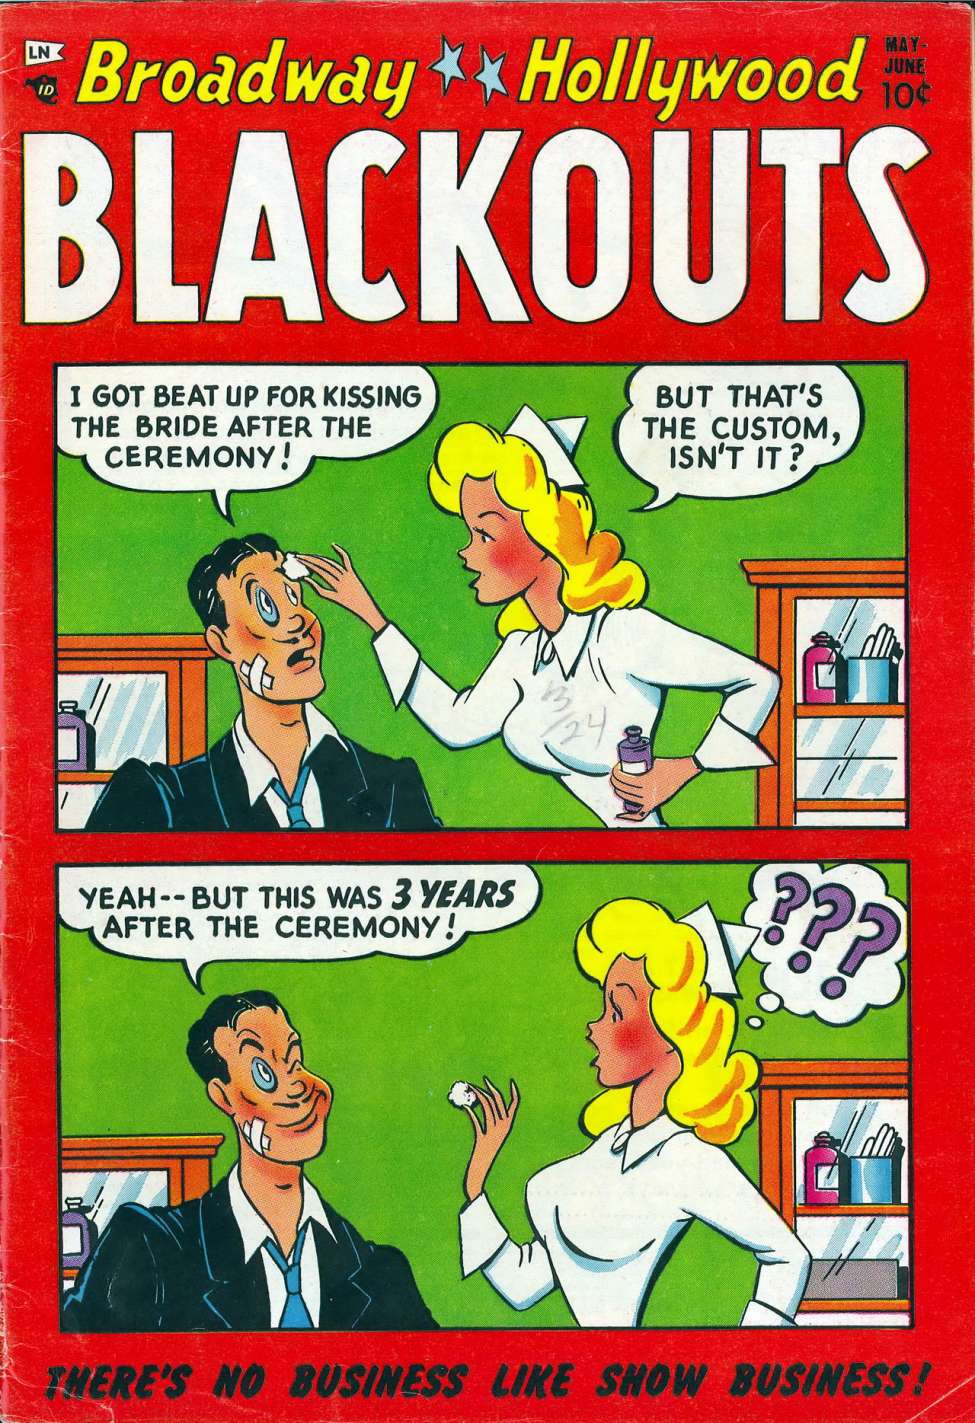 Book Cover For Broadway-Hollywood Blackouts 2